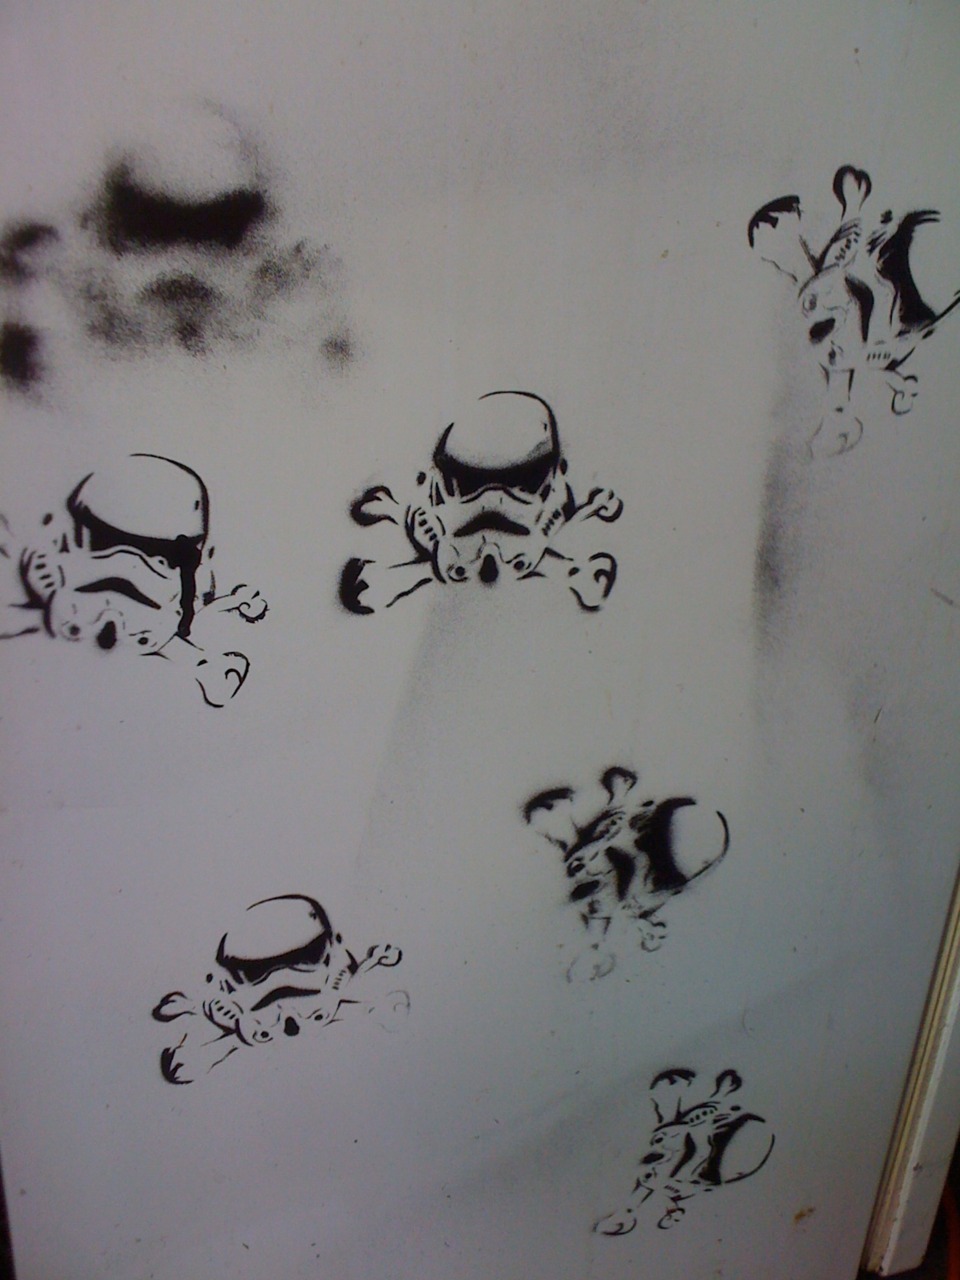 
Stormtrooper Jolly Rogers Cut Out
Spray on Refrigerator; Canvas; T-Shirt
